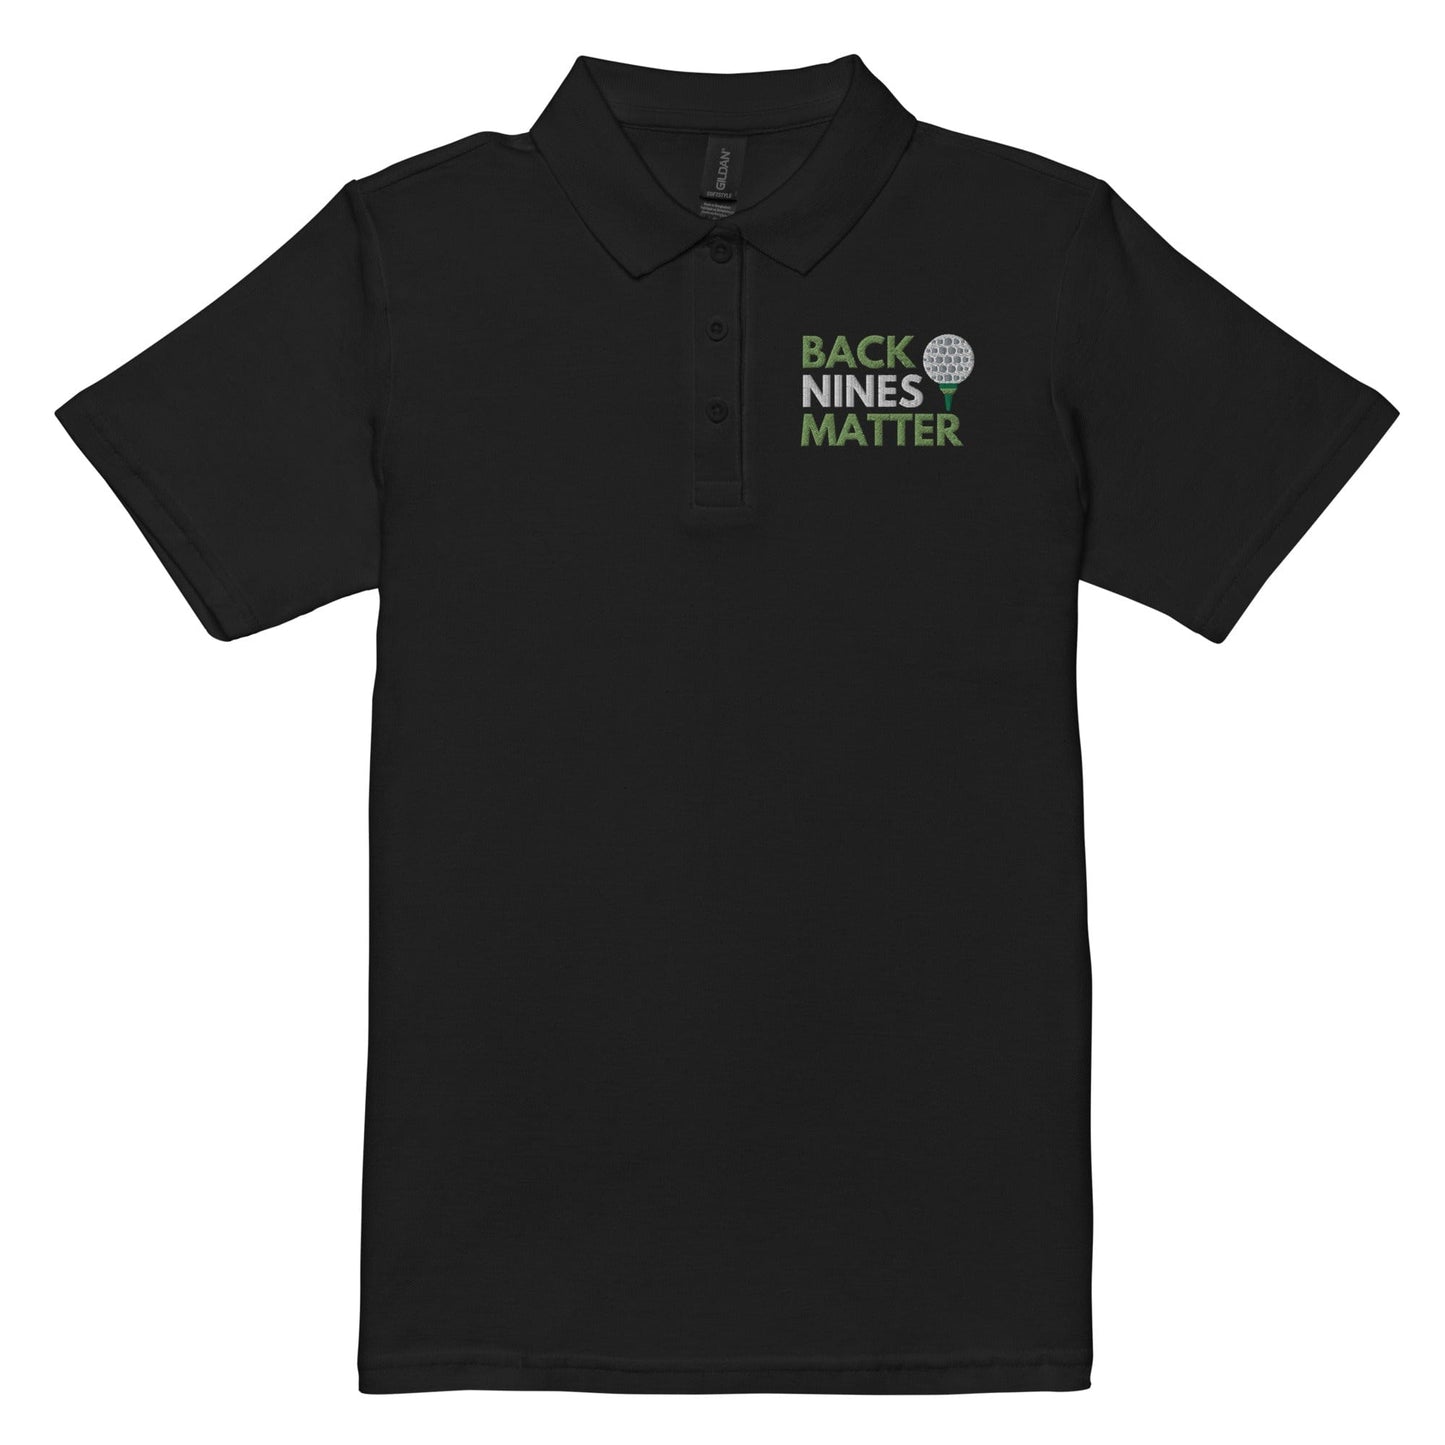 Funny Golfer Gifts  Womens Polo Black / S Back Nines Matter Women’s Pique Polo Shirt